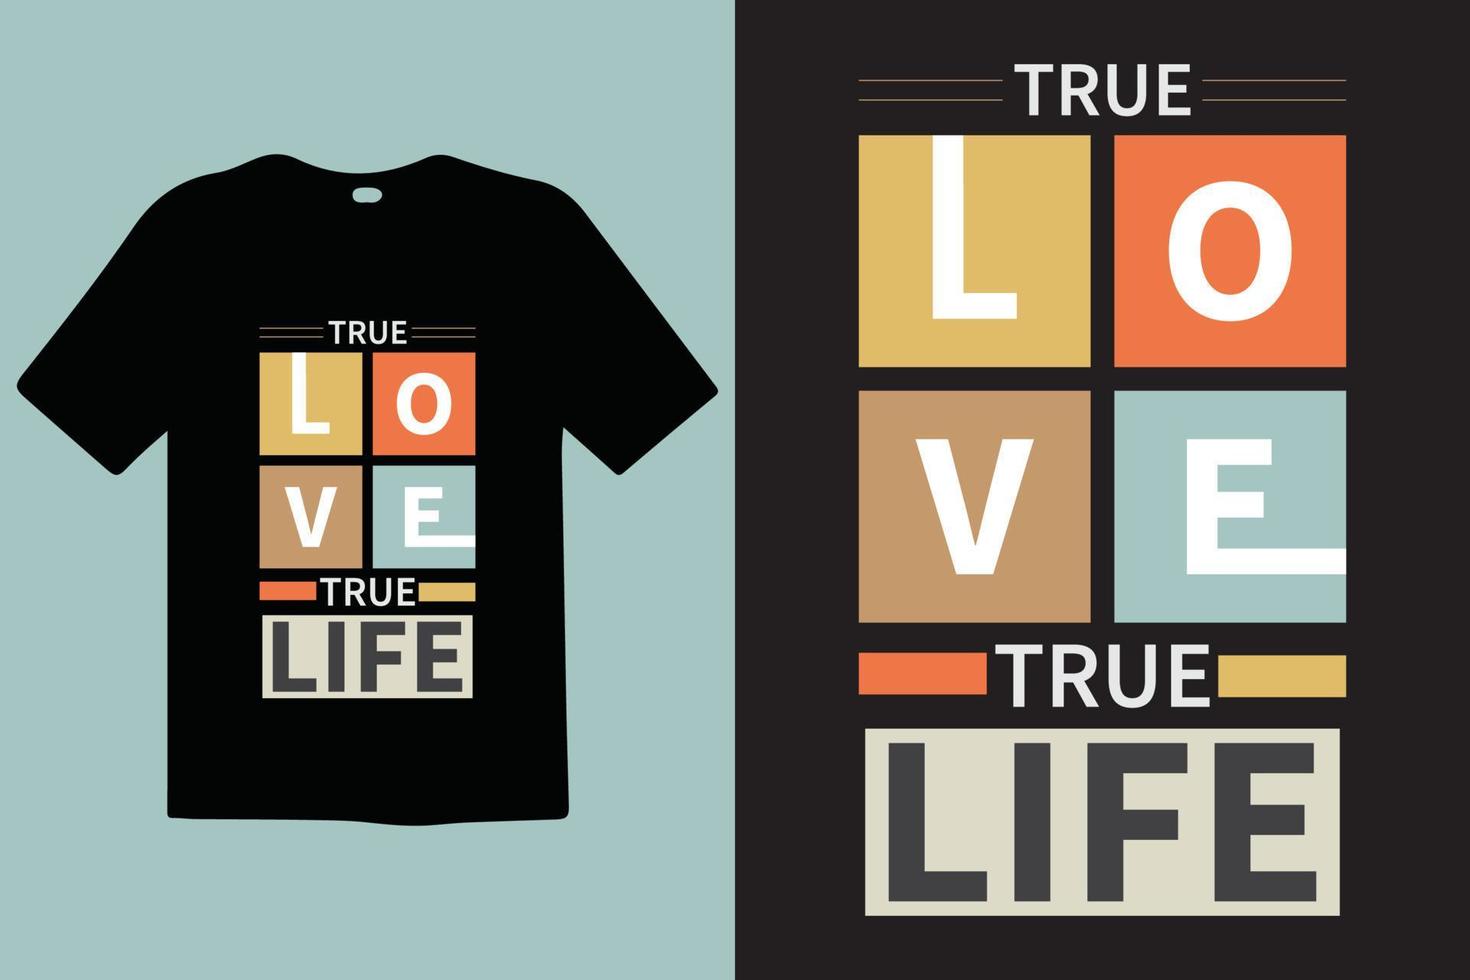 True Love True Life typography lettering quotes. T-shirt design. Inspirational and motivational words Ready to print. Stylish t-shirt and apparel trendy design print, vector illustration.